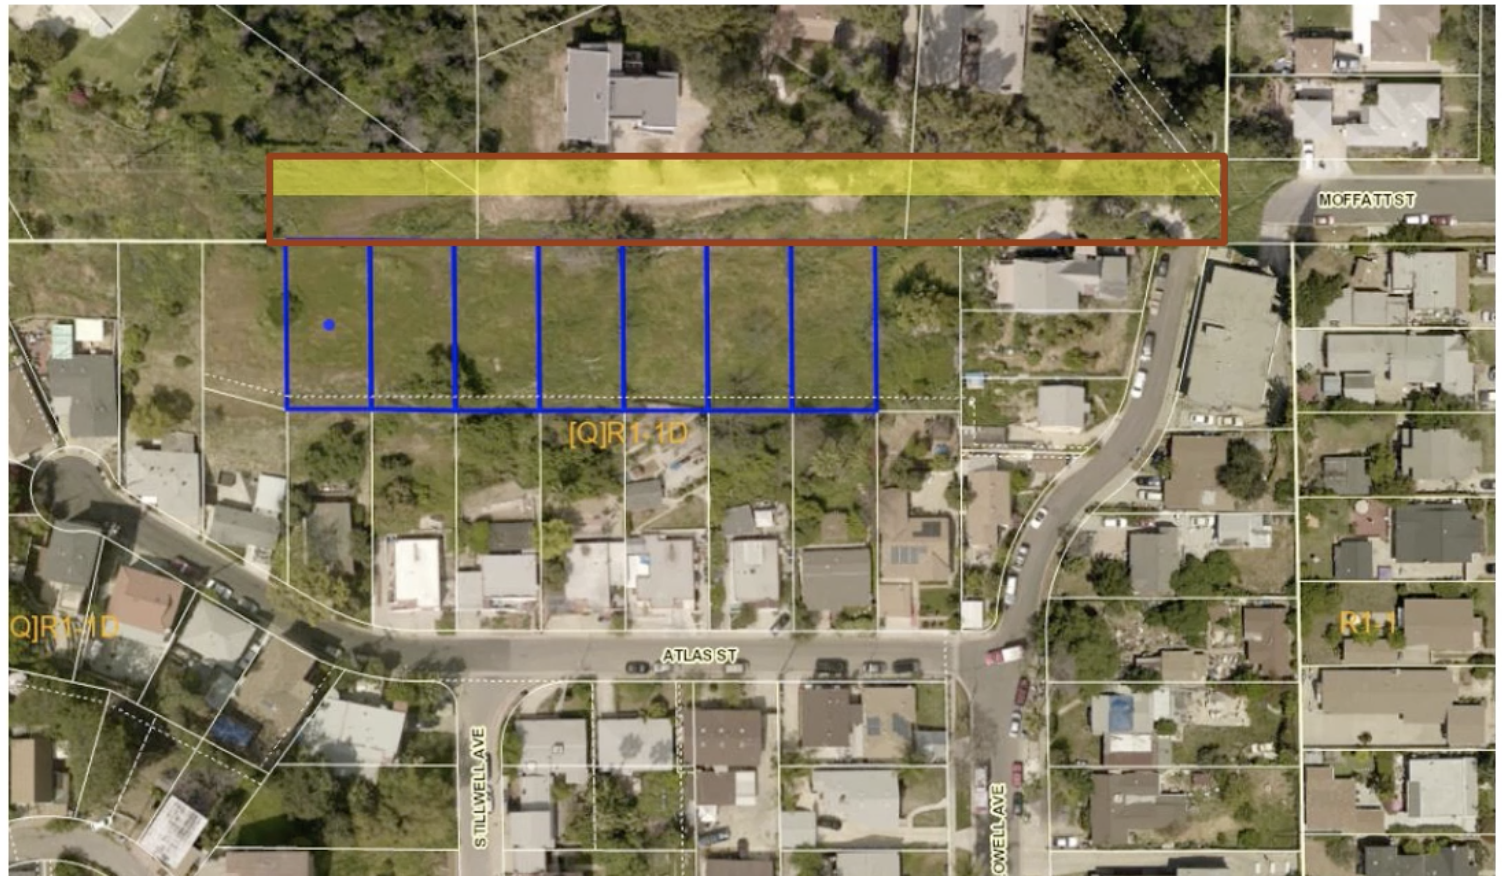 Thumbnail for City Council stands by Moffatt Street extension project despite widespread community opposition